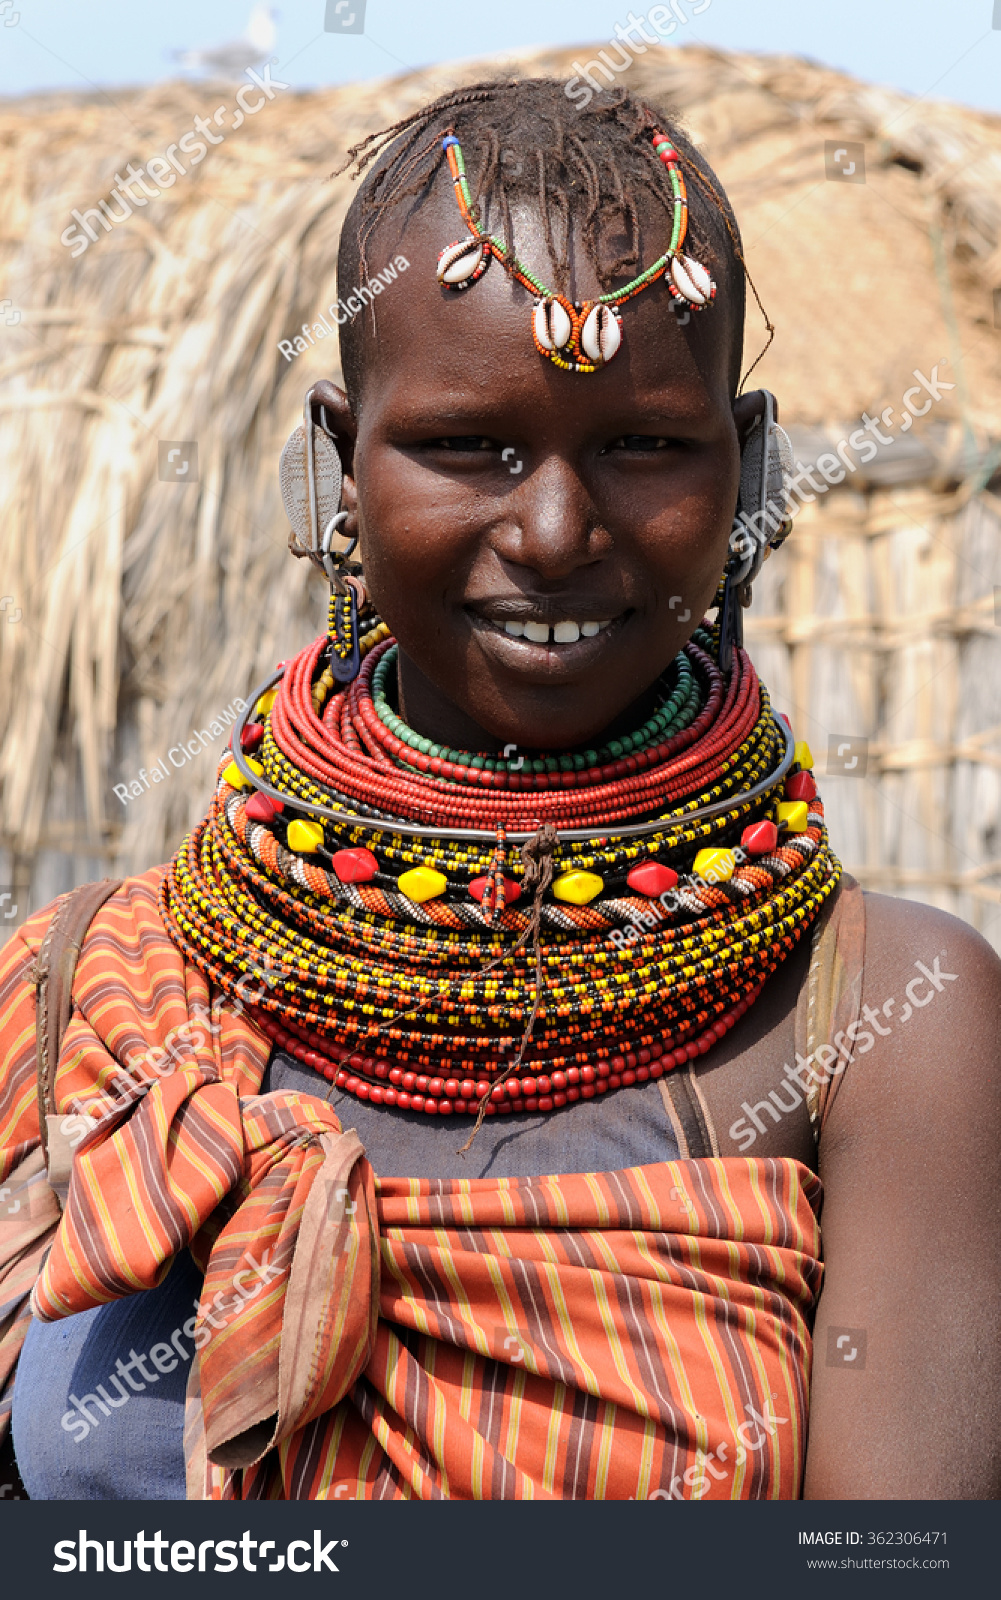 African Tribal Women Pictures 16